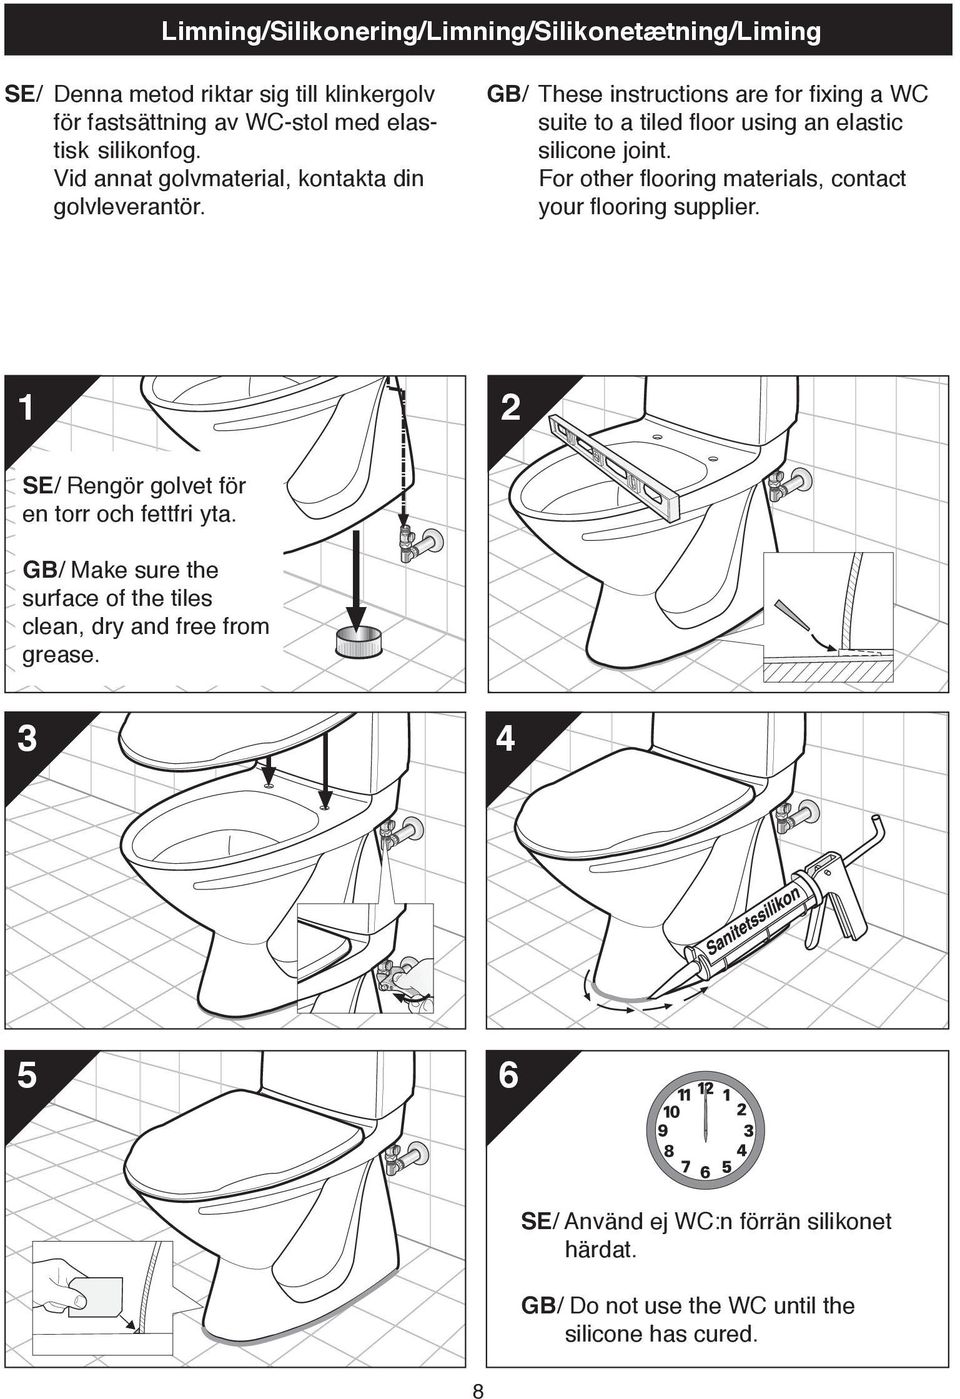 GB/ These instructions are for fixing a WC suite to a tiled floor using an elastic silicone joint.